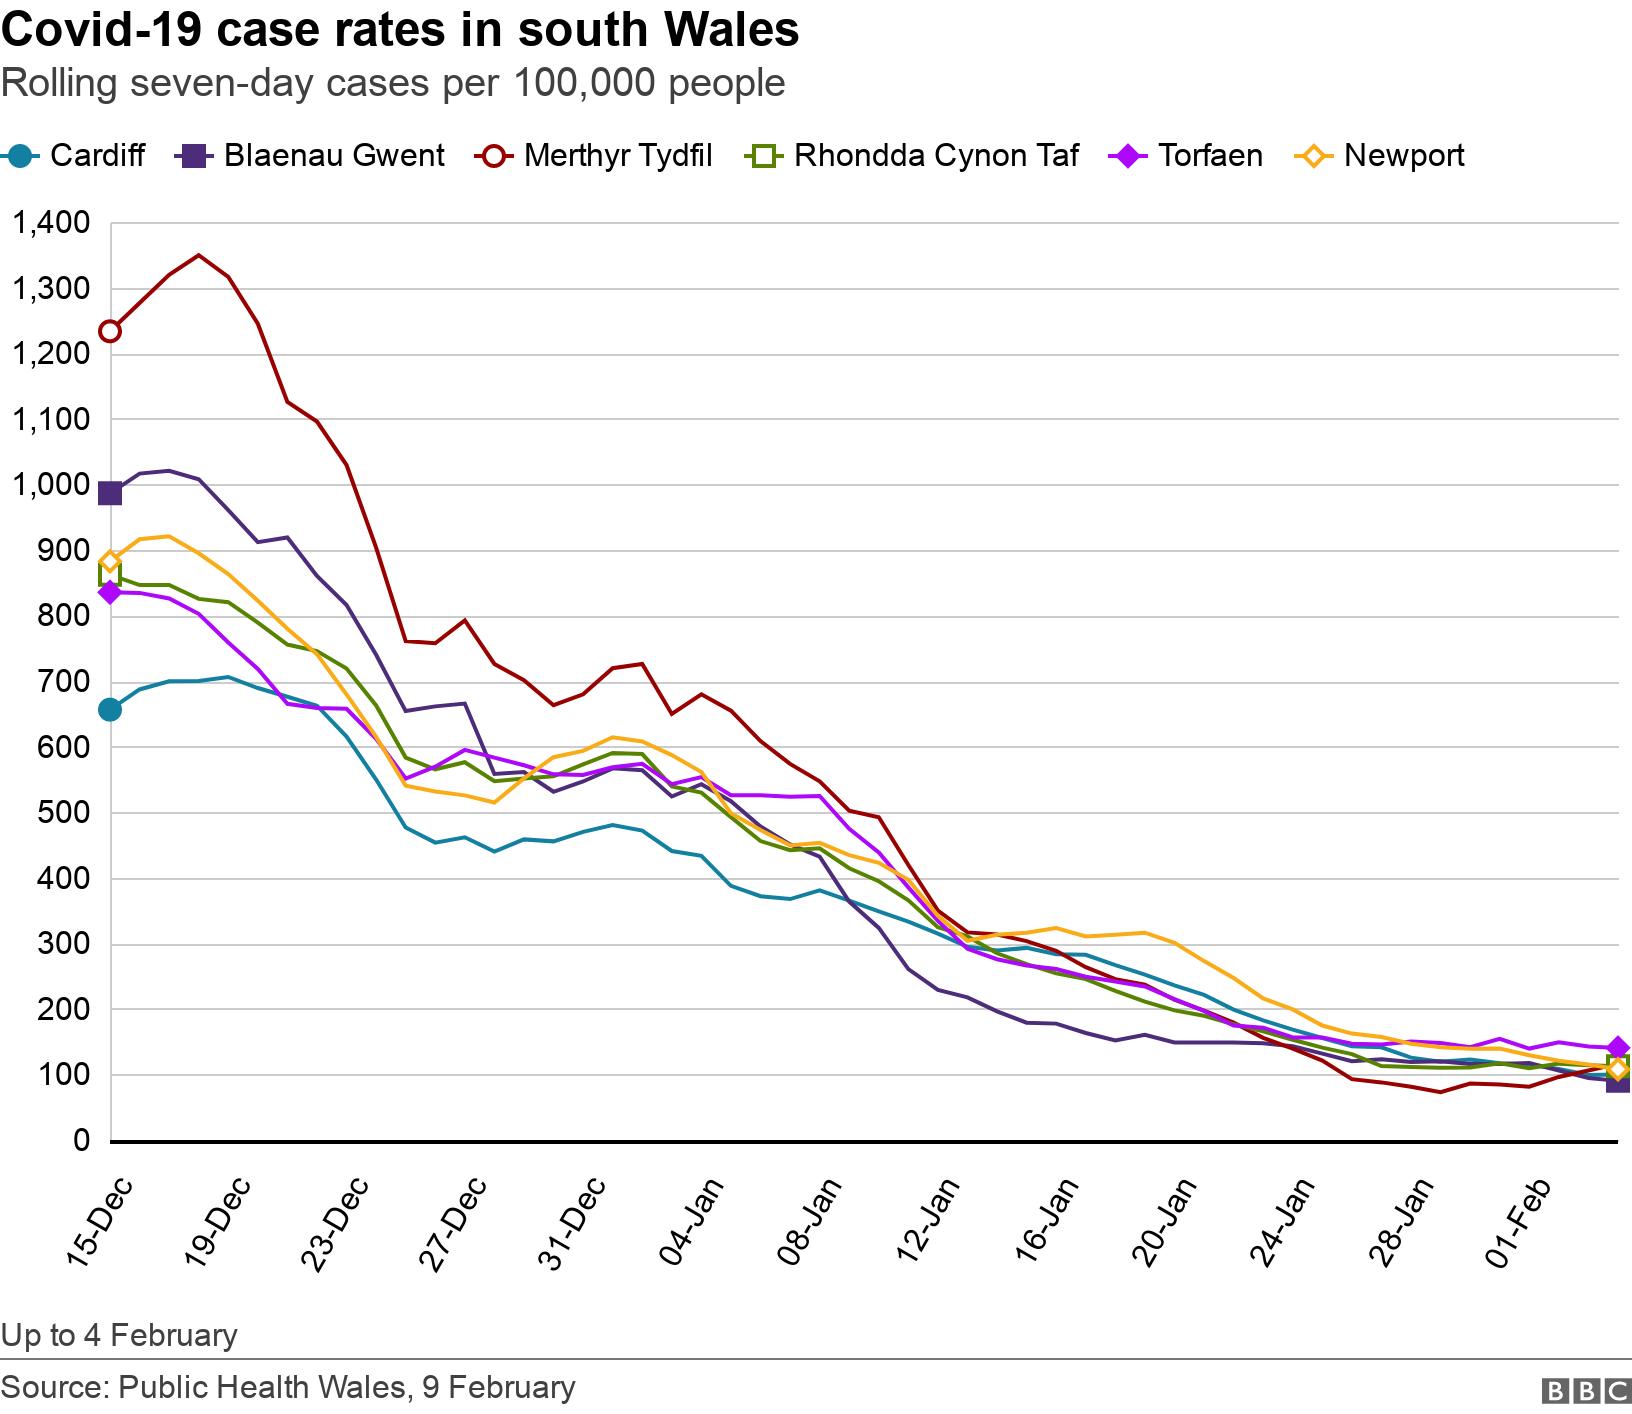 Covid-19 case rates in south Wales. Rolling seven-day cases per 100,000 people.  Up to 4 February.